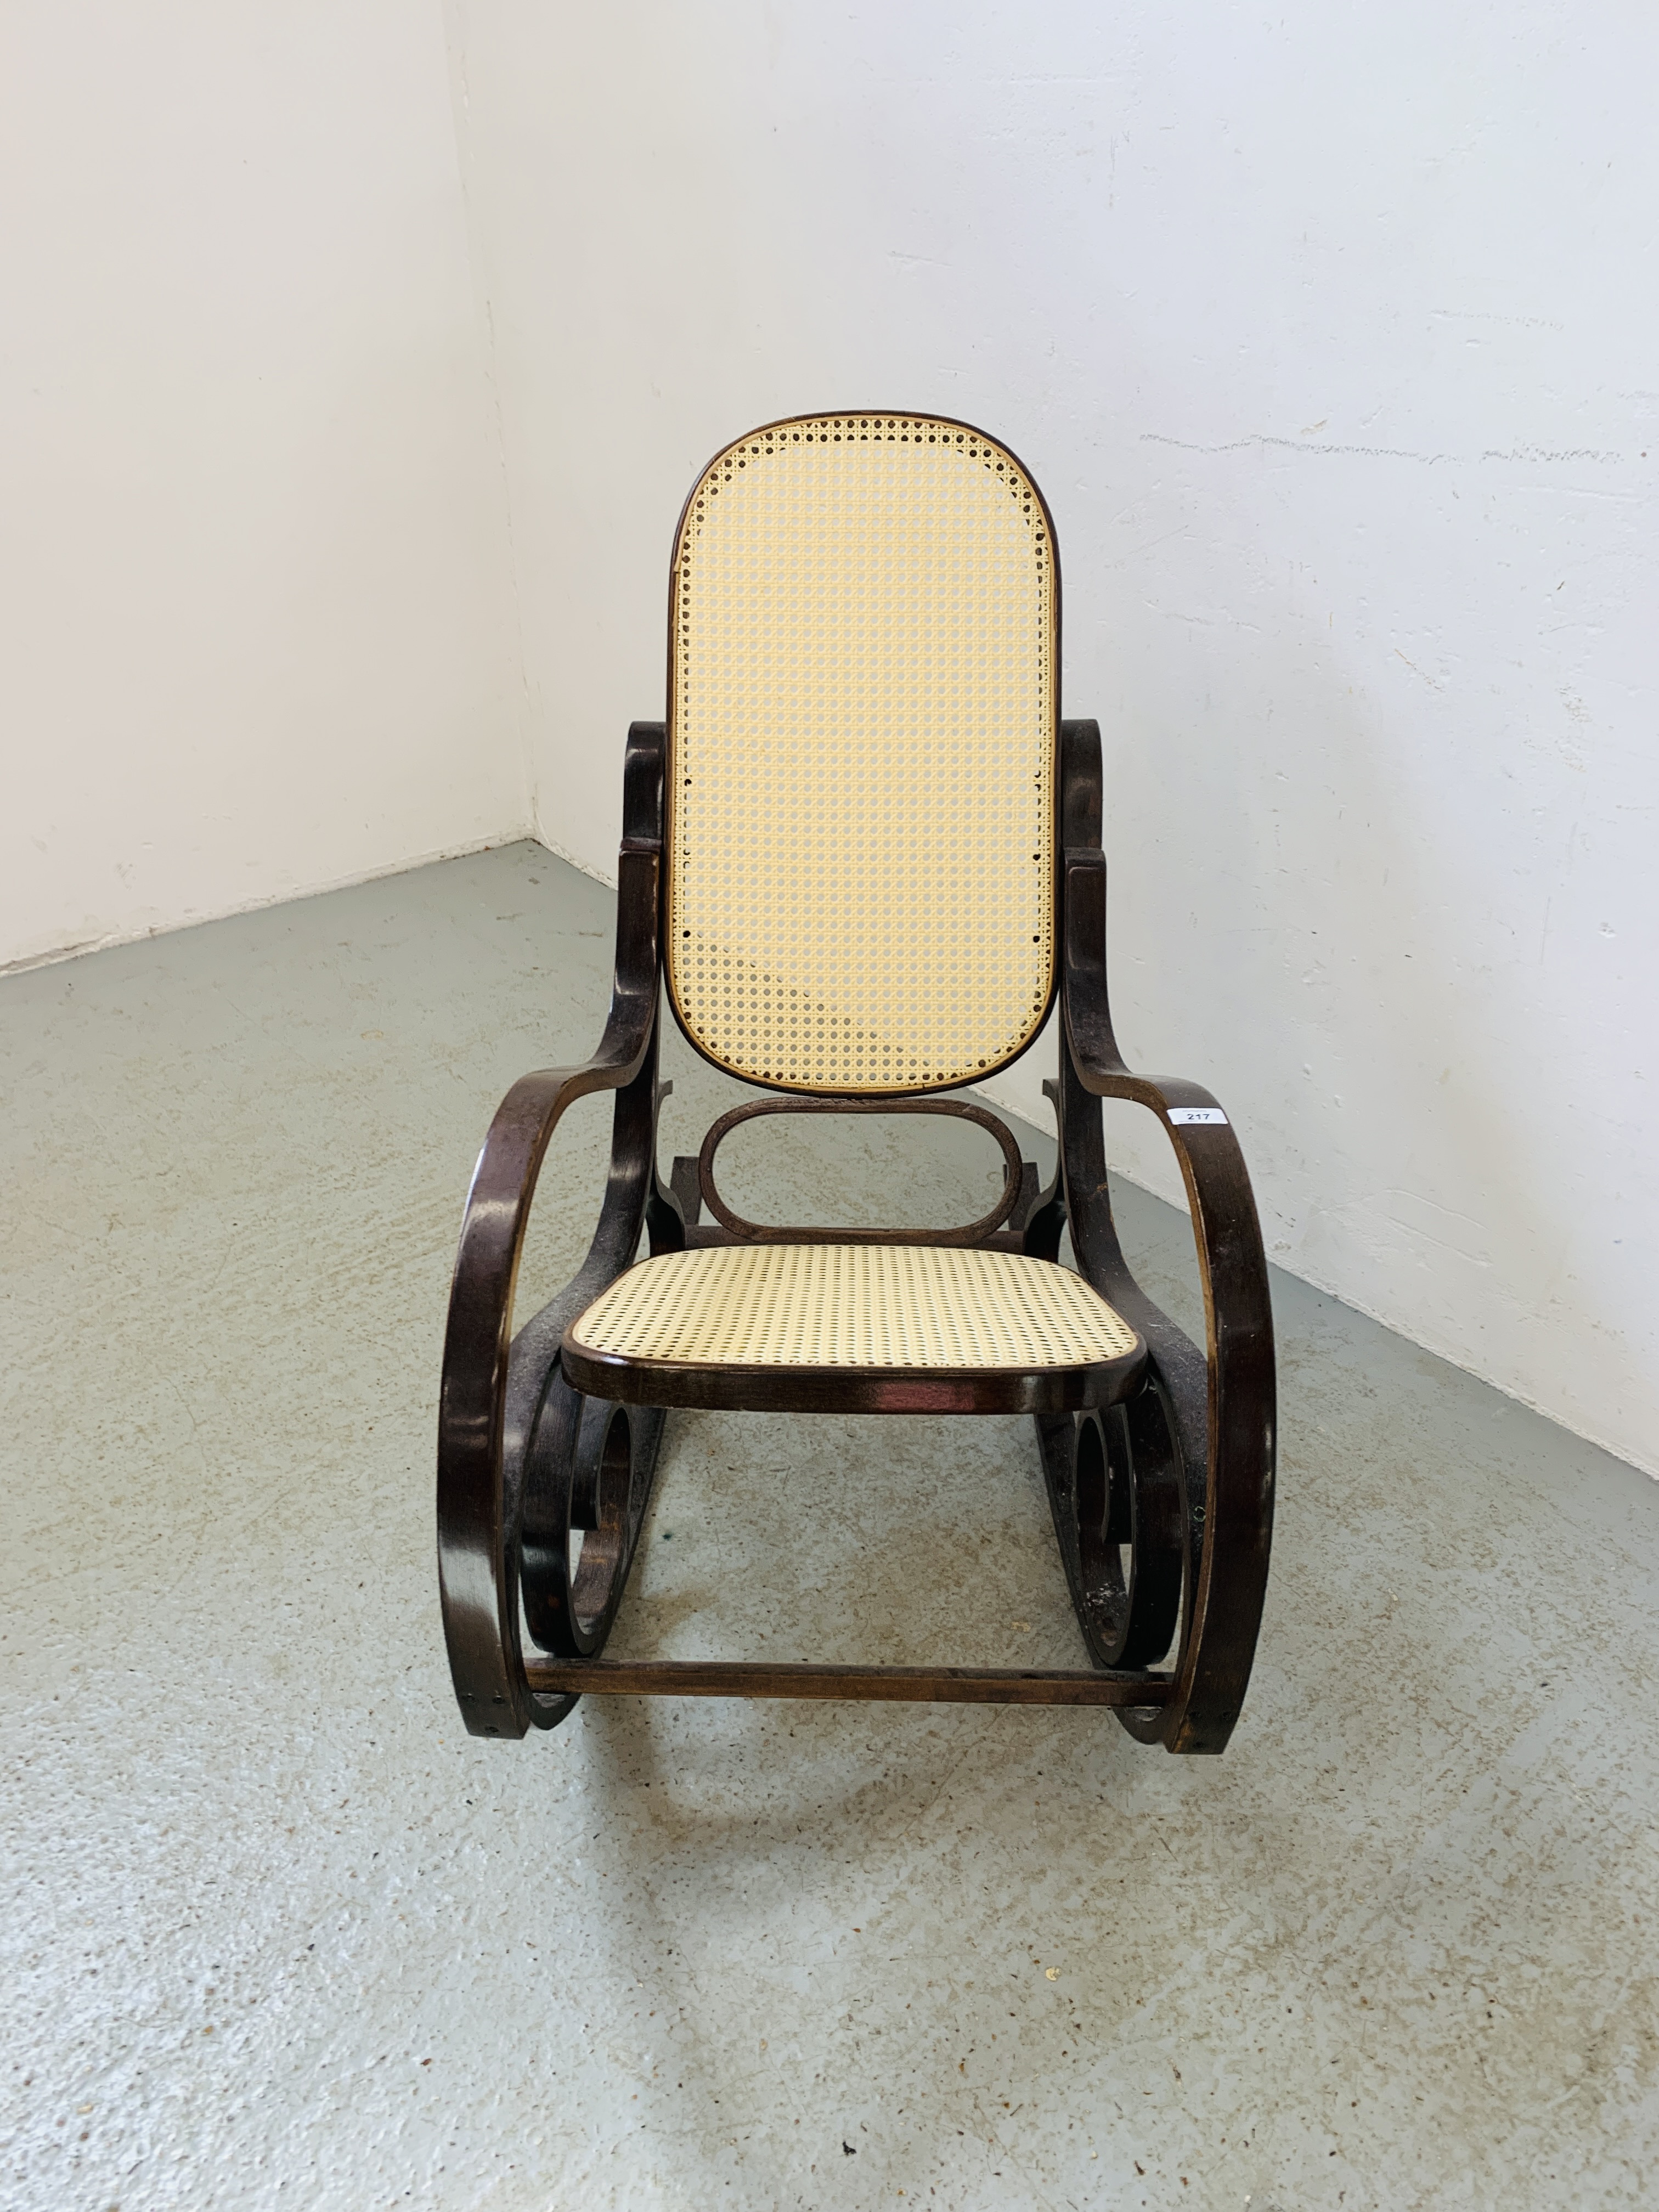 A BENTWOOD ROCKING CHAIR WITH RATTAN SEAT AND BACK - Image 3 of 6